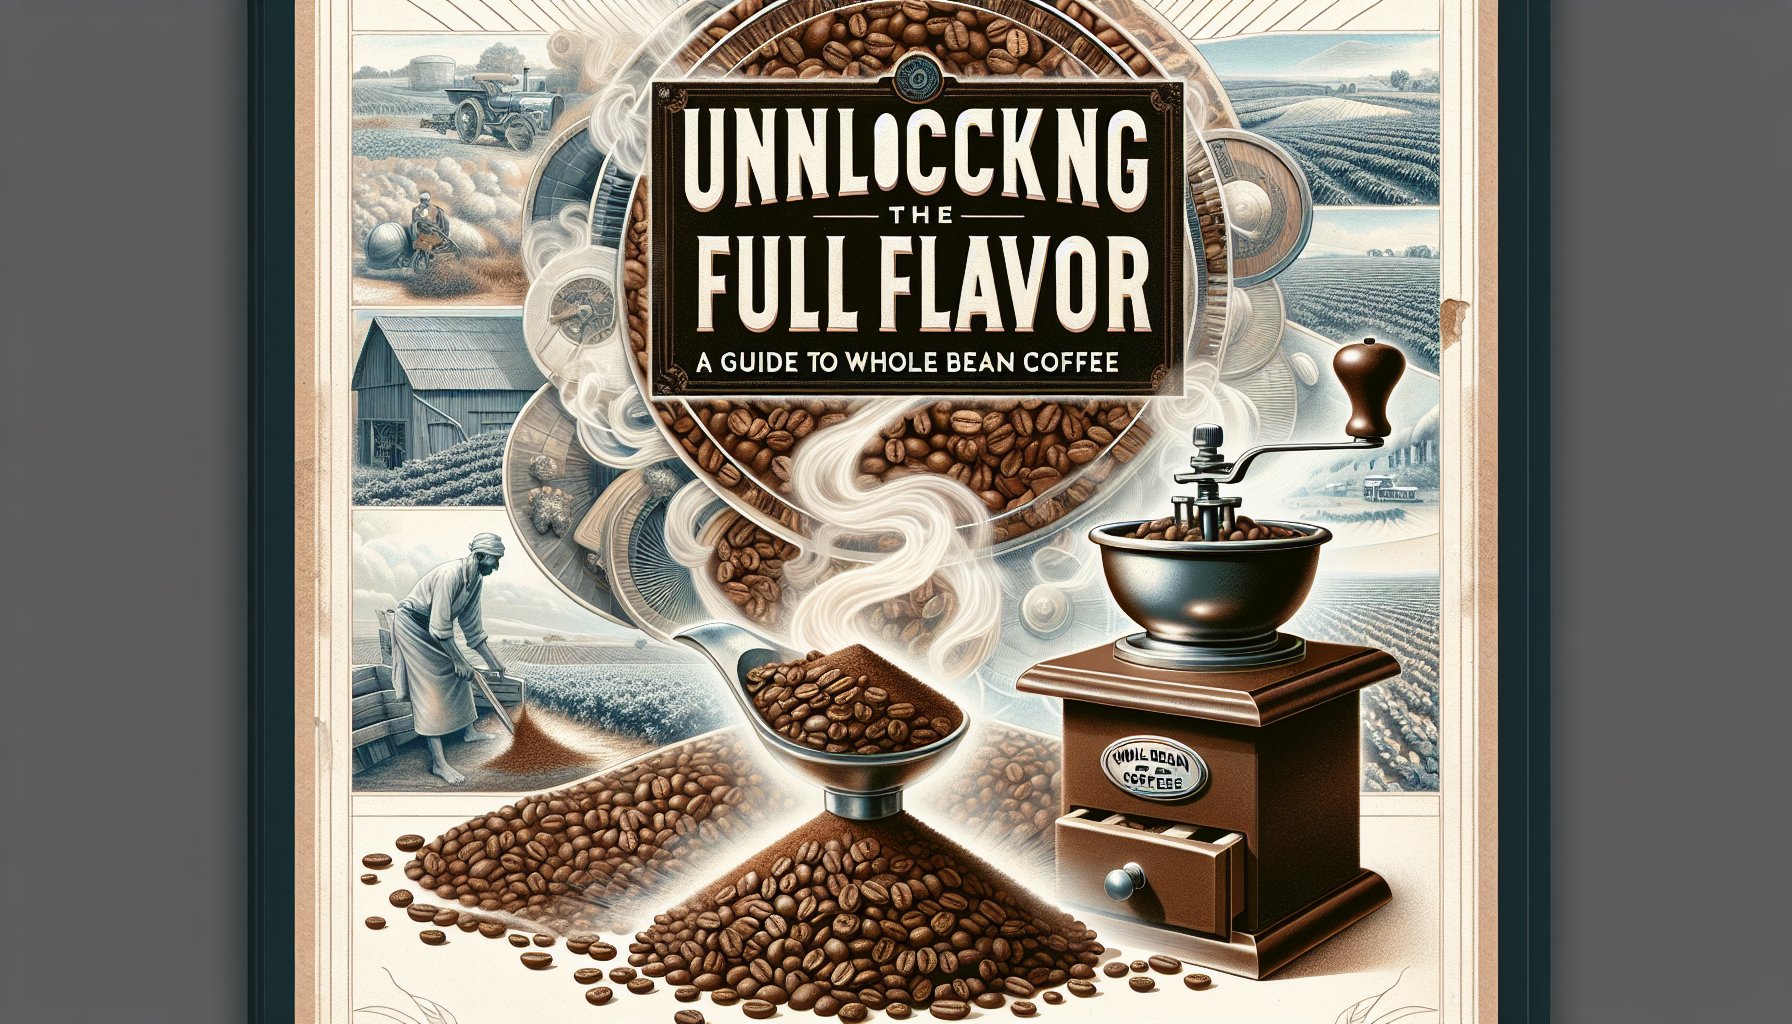 Visual interpretation of the book cover for 'Unlocking the Full Flavor: A Guide to Whole Bean Coffee'. The center of the image features a pile of whole coffee beans, releasing strong aromatic fumes, s